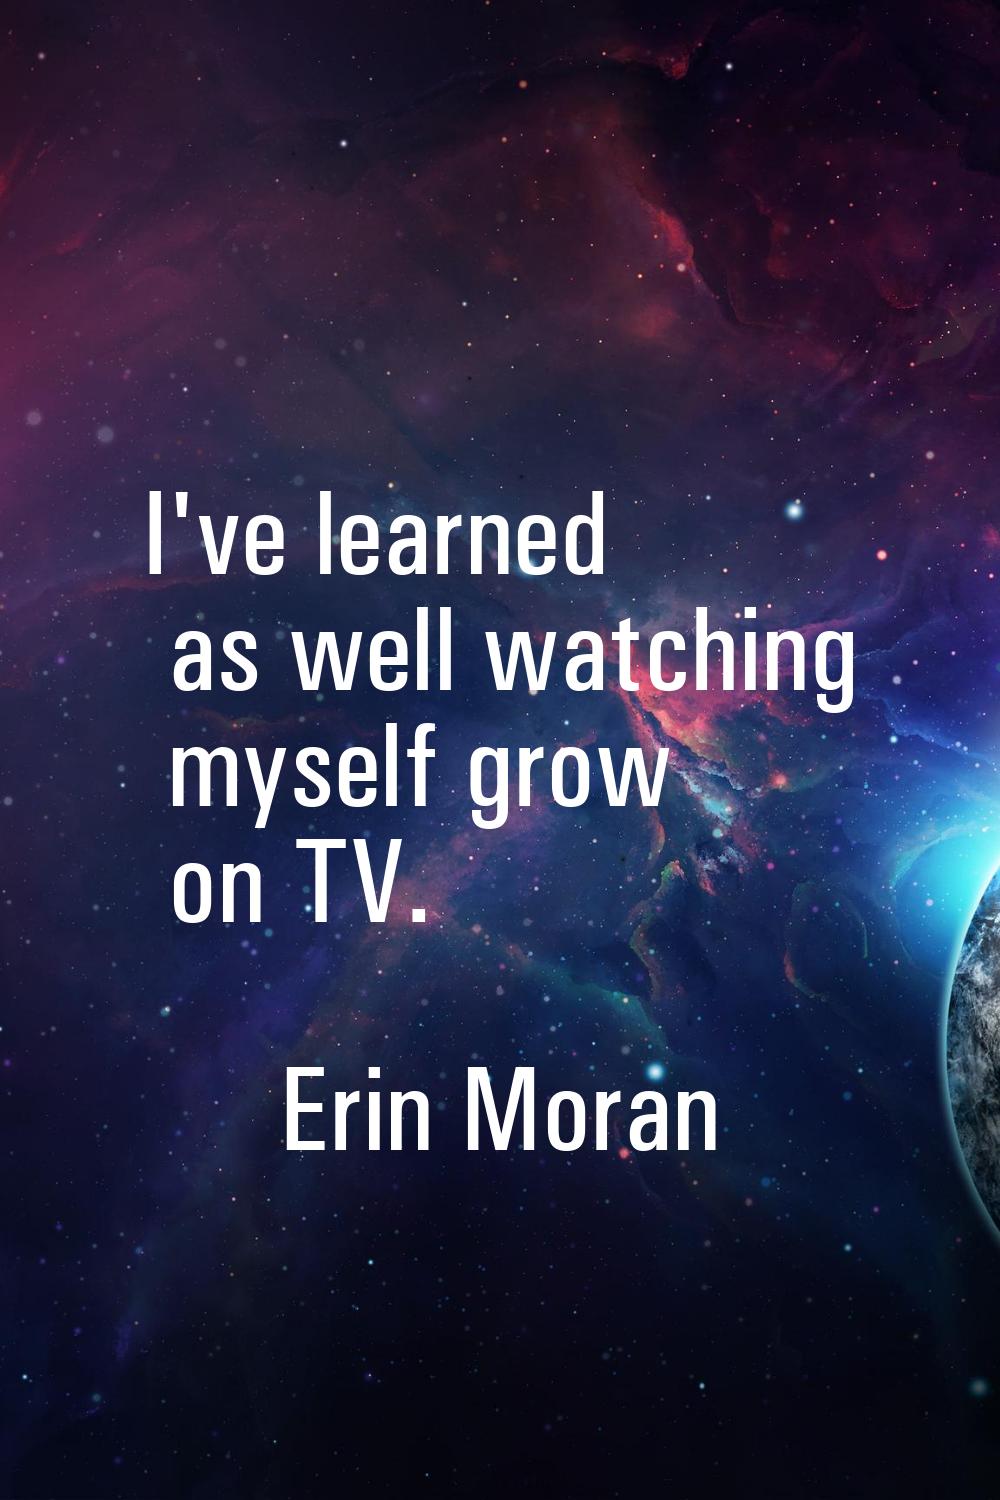 I've learned as well watching myself grow on TV.